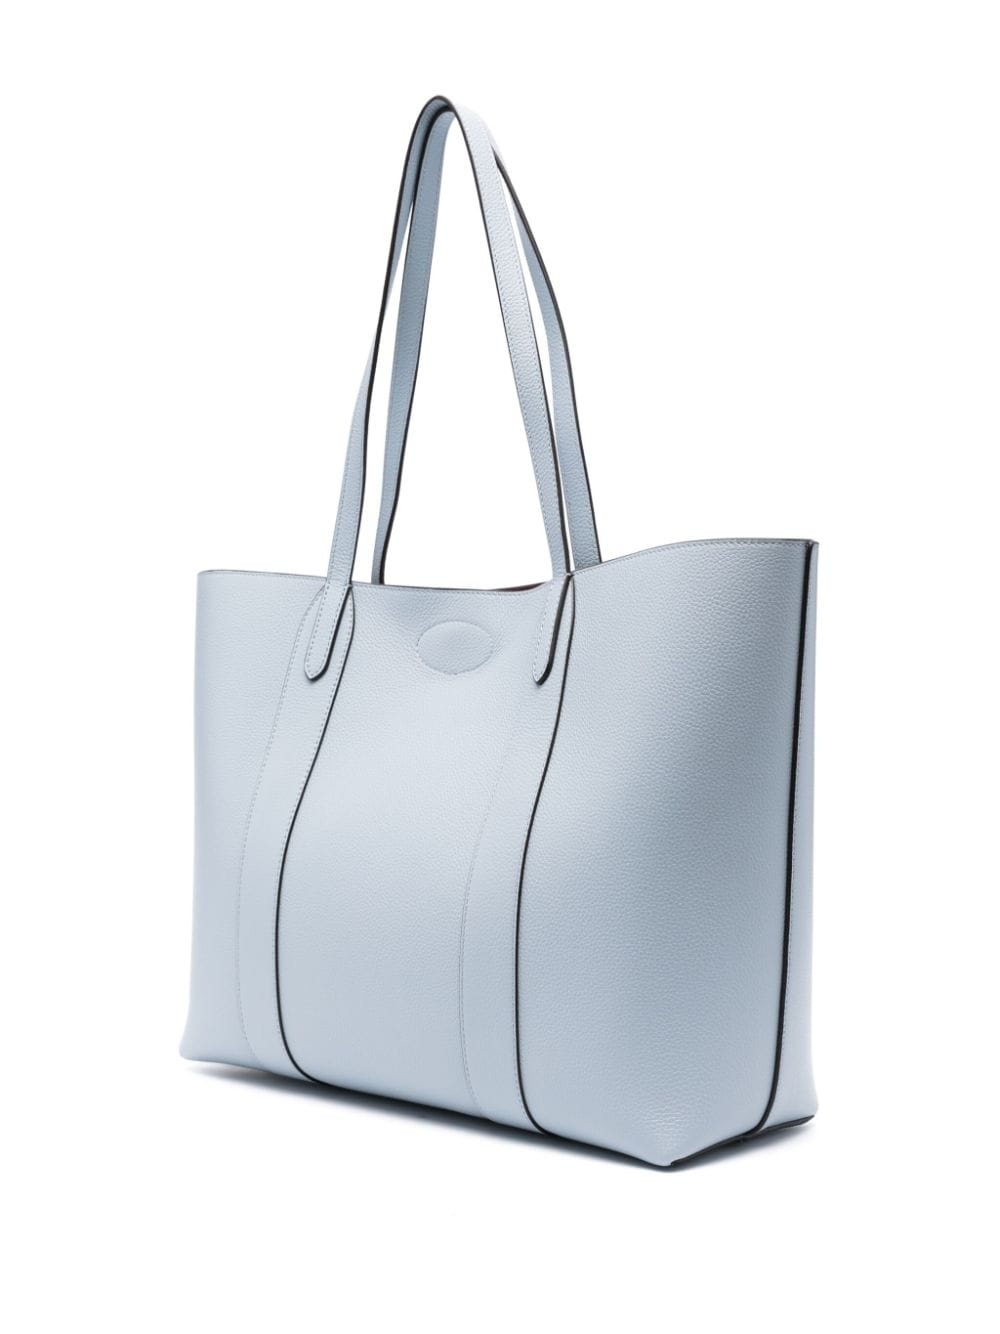 Bayswater leather tote bag - 3